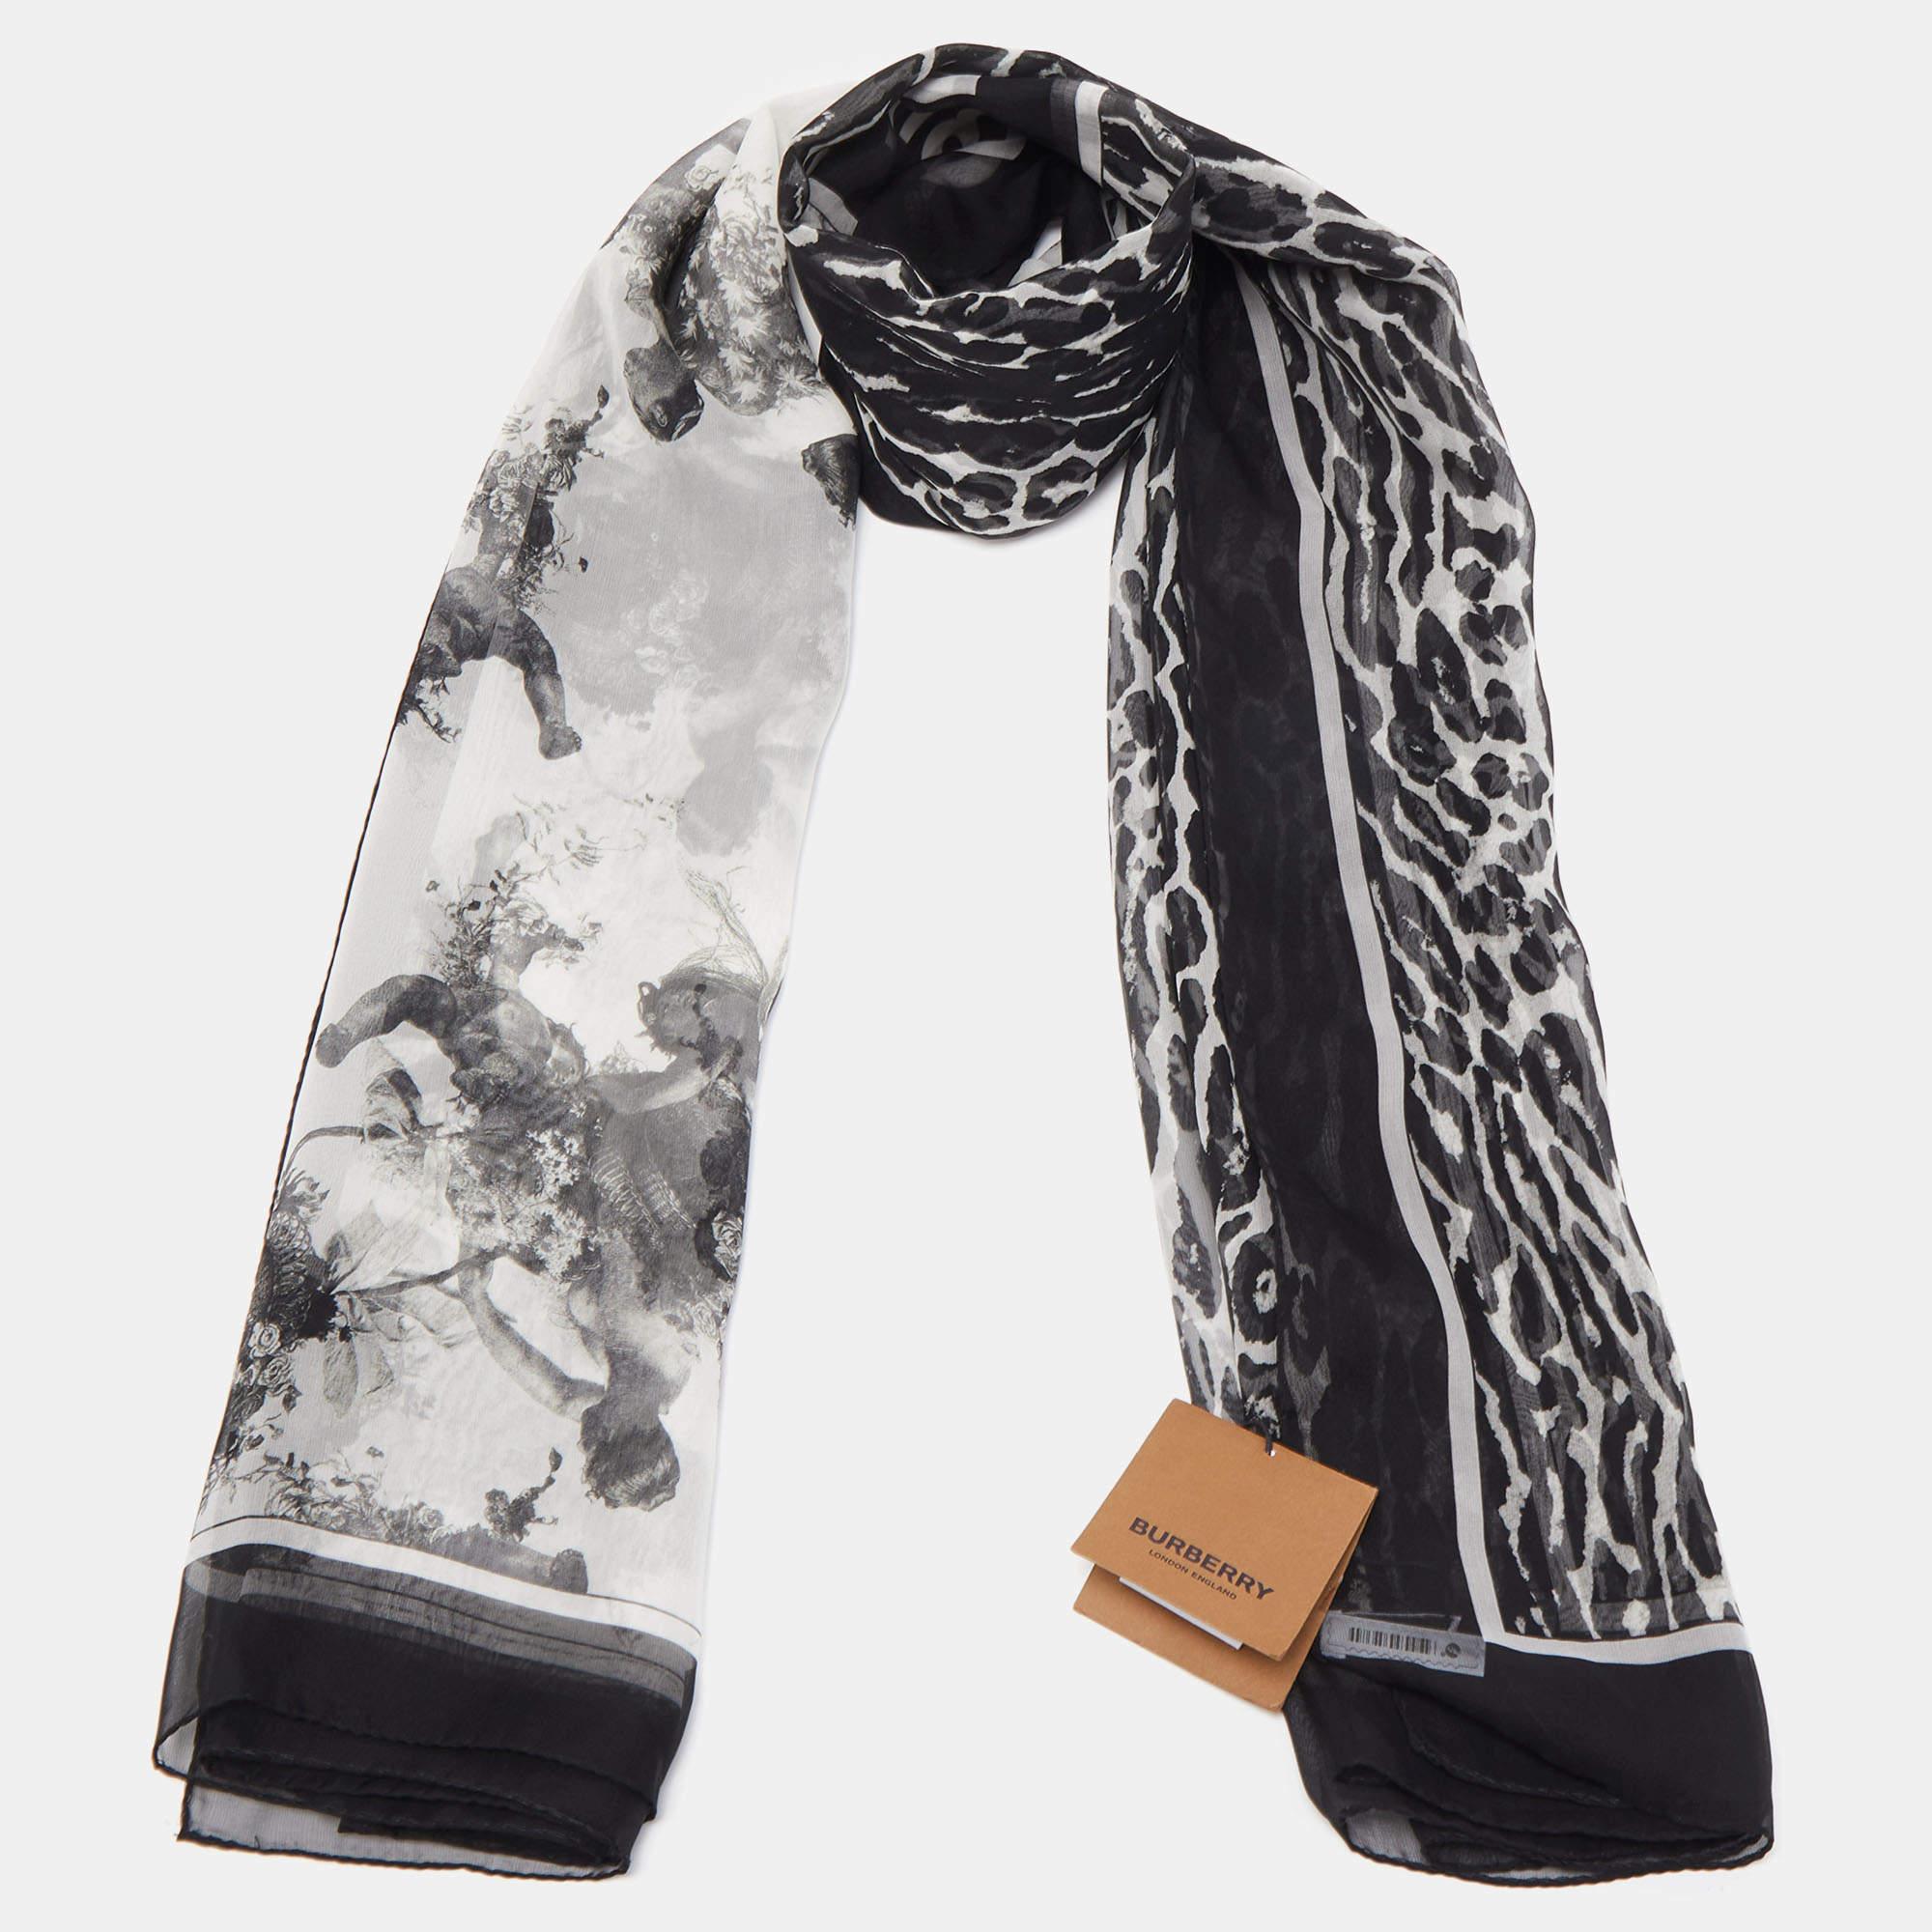 Classy and stylish are some words that come to our minds when we look at the scarf. The label brings you this versatile creation made from luxurious materials that you style with many outfits.

Includes: Brand tag